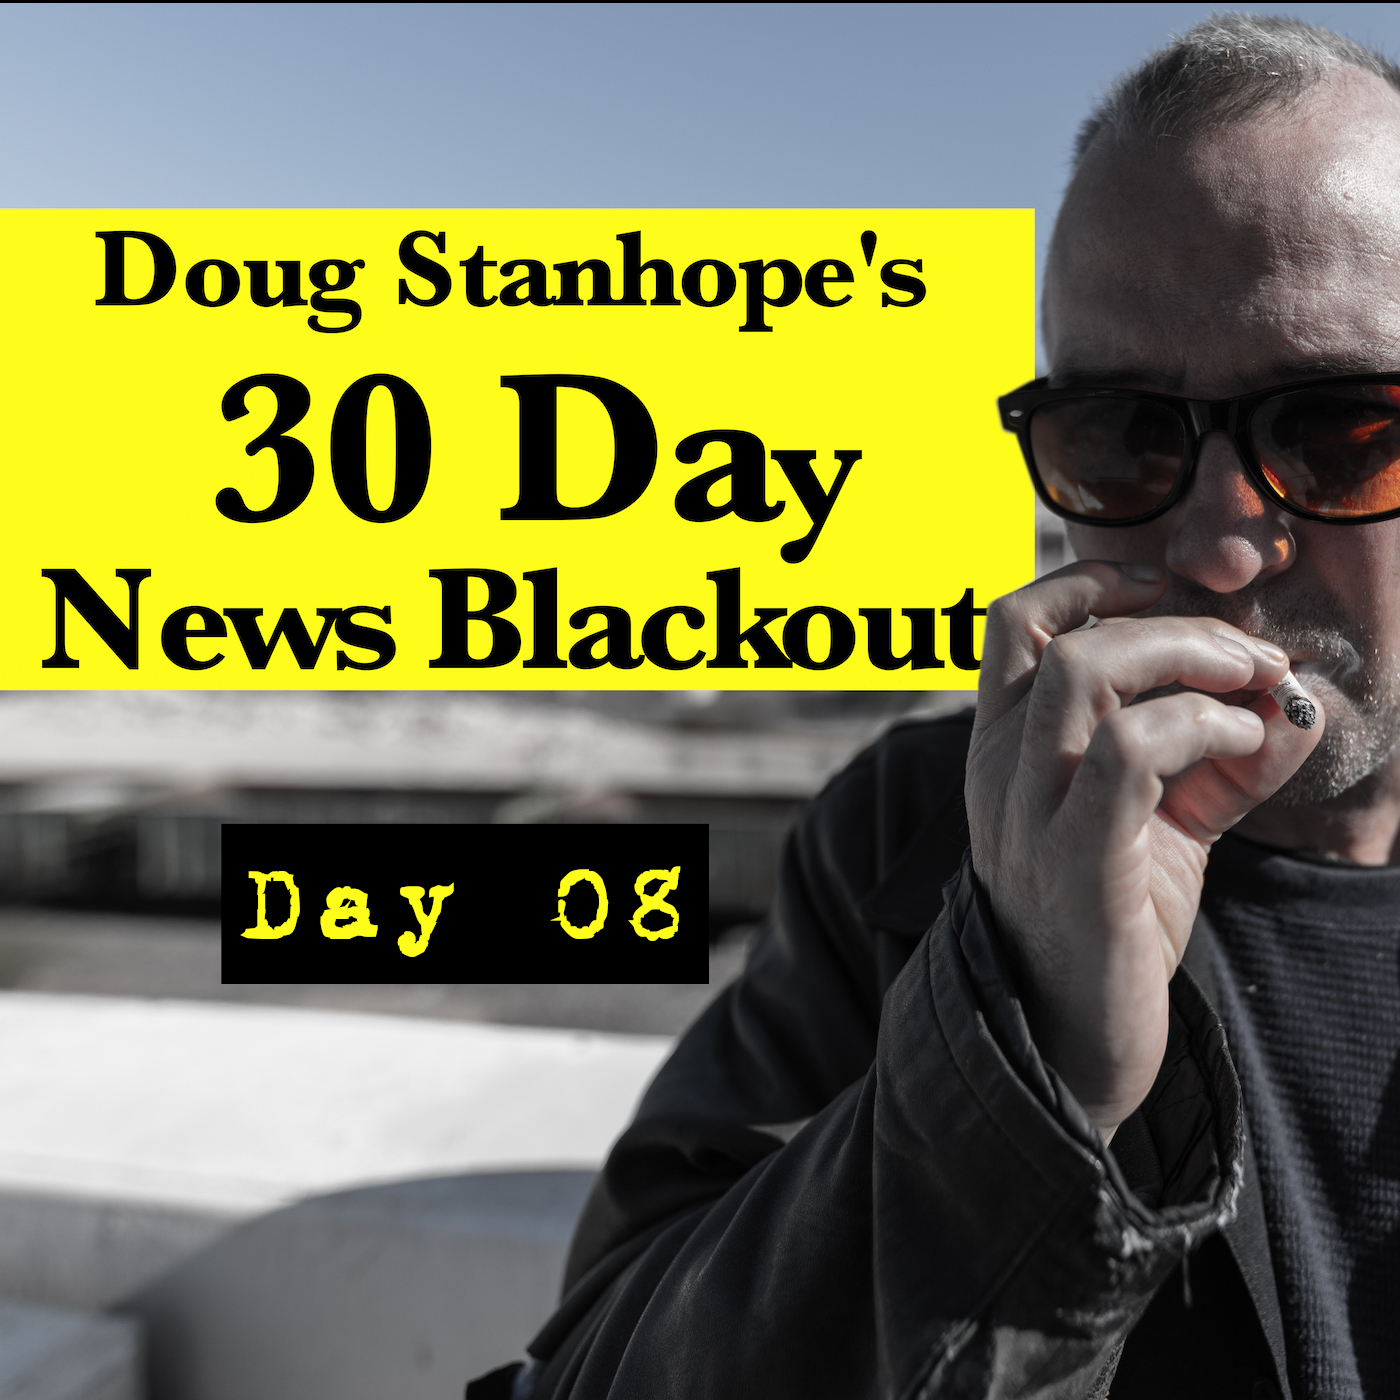 Ep.#372: Day 08 - Stanhope’s 30 Day News Blackout